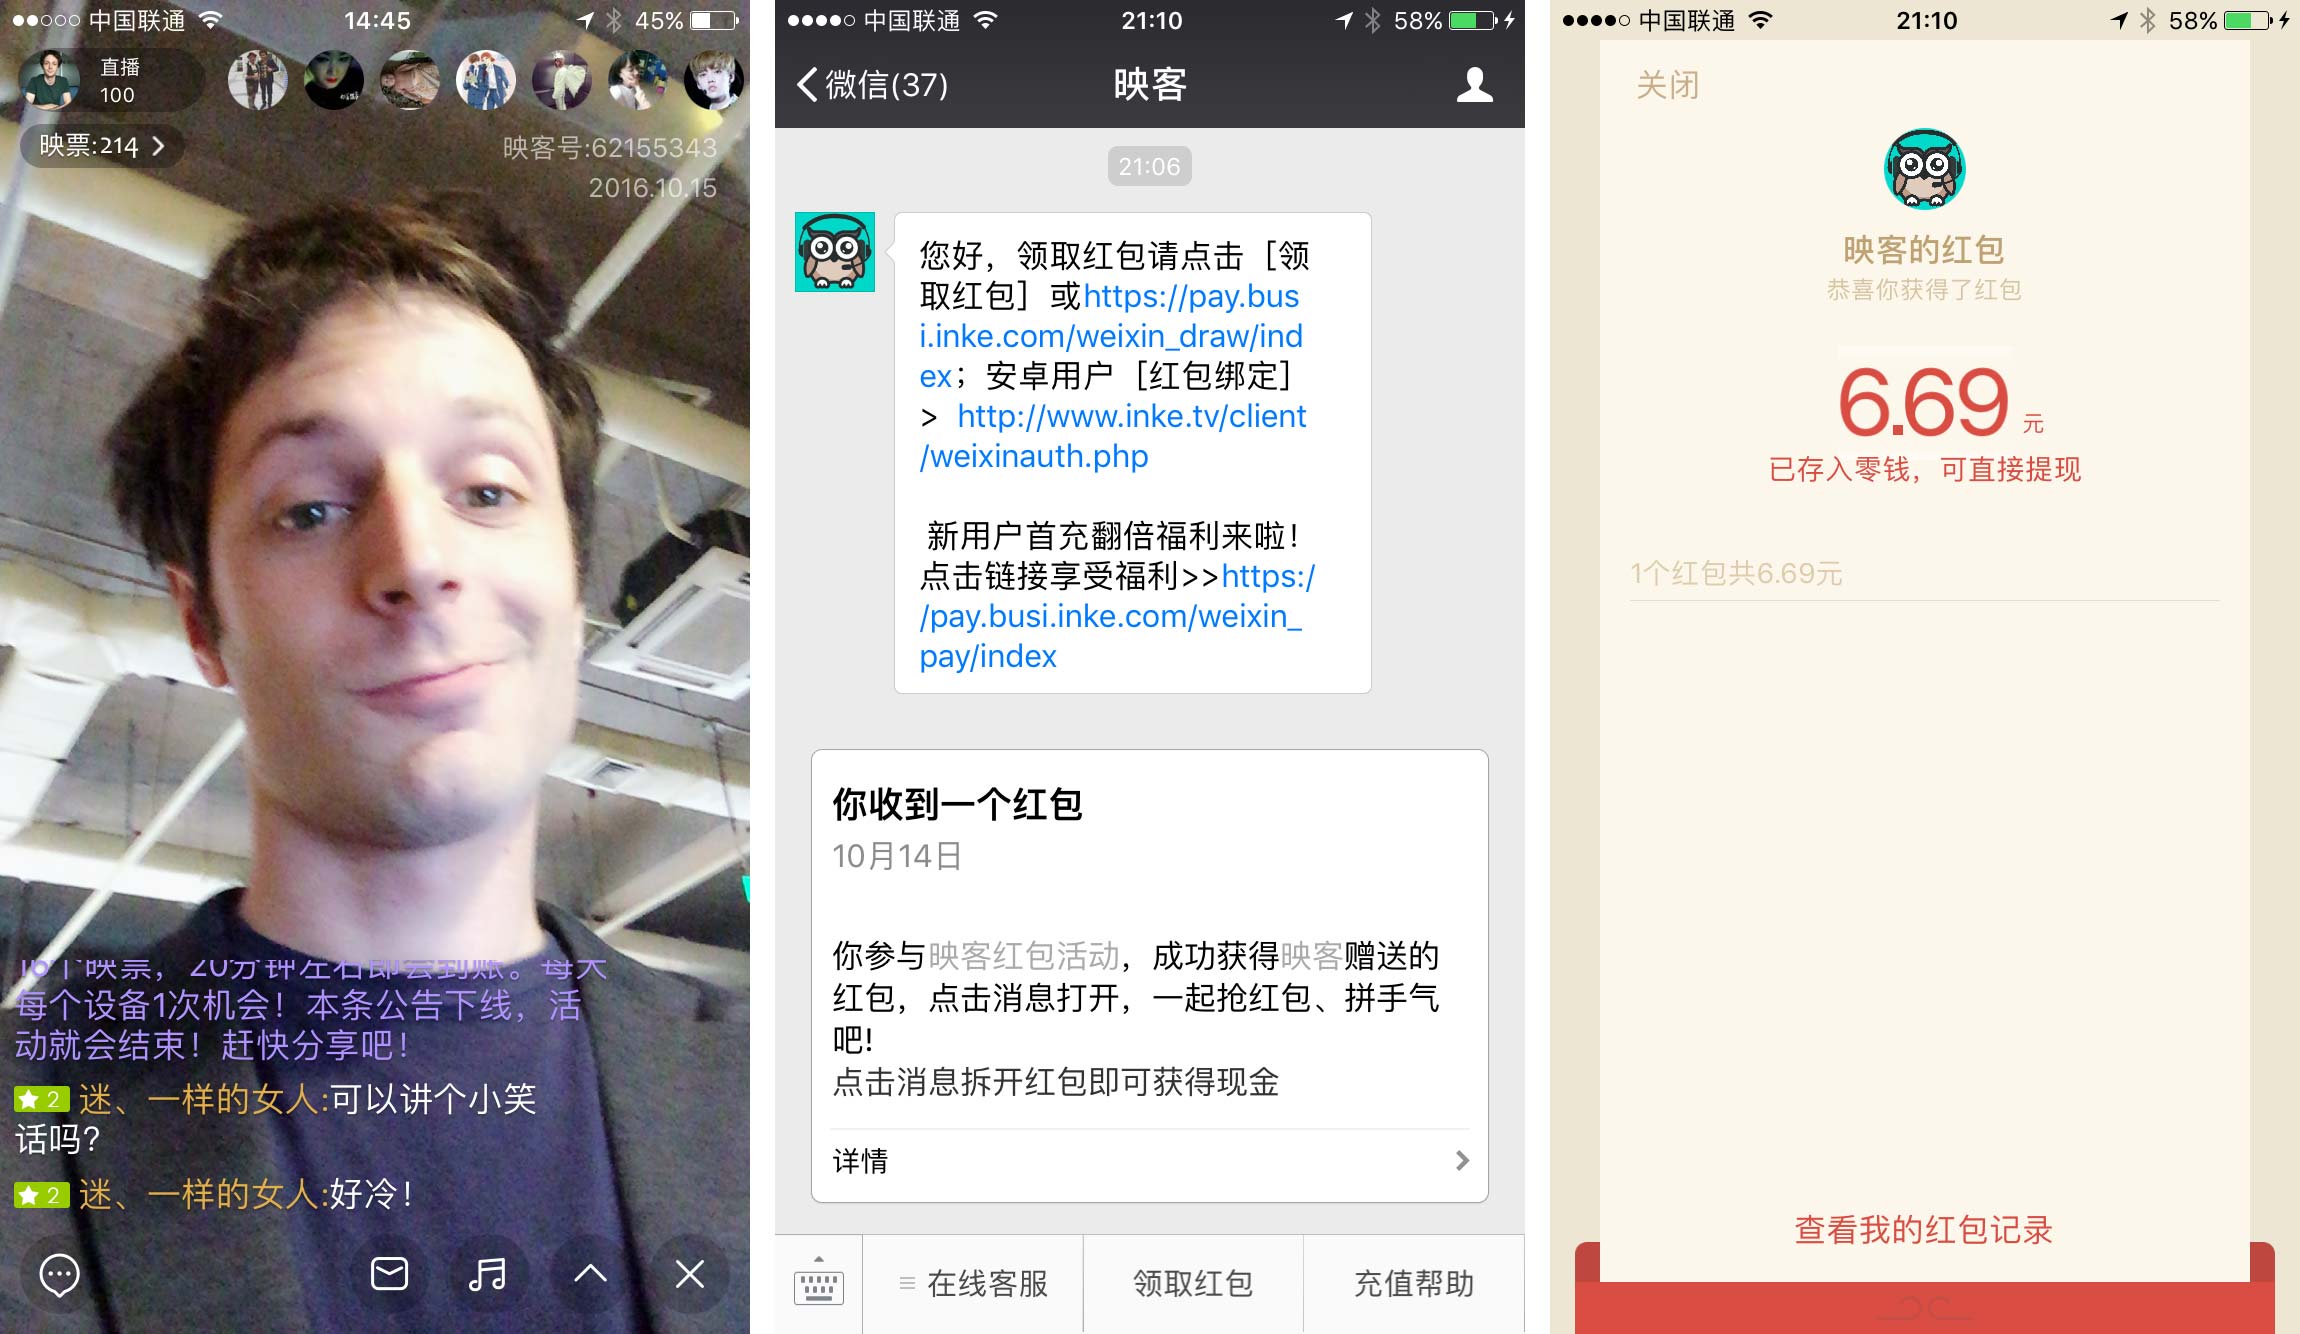 Is WeChat getting into live streaming?